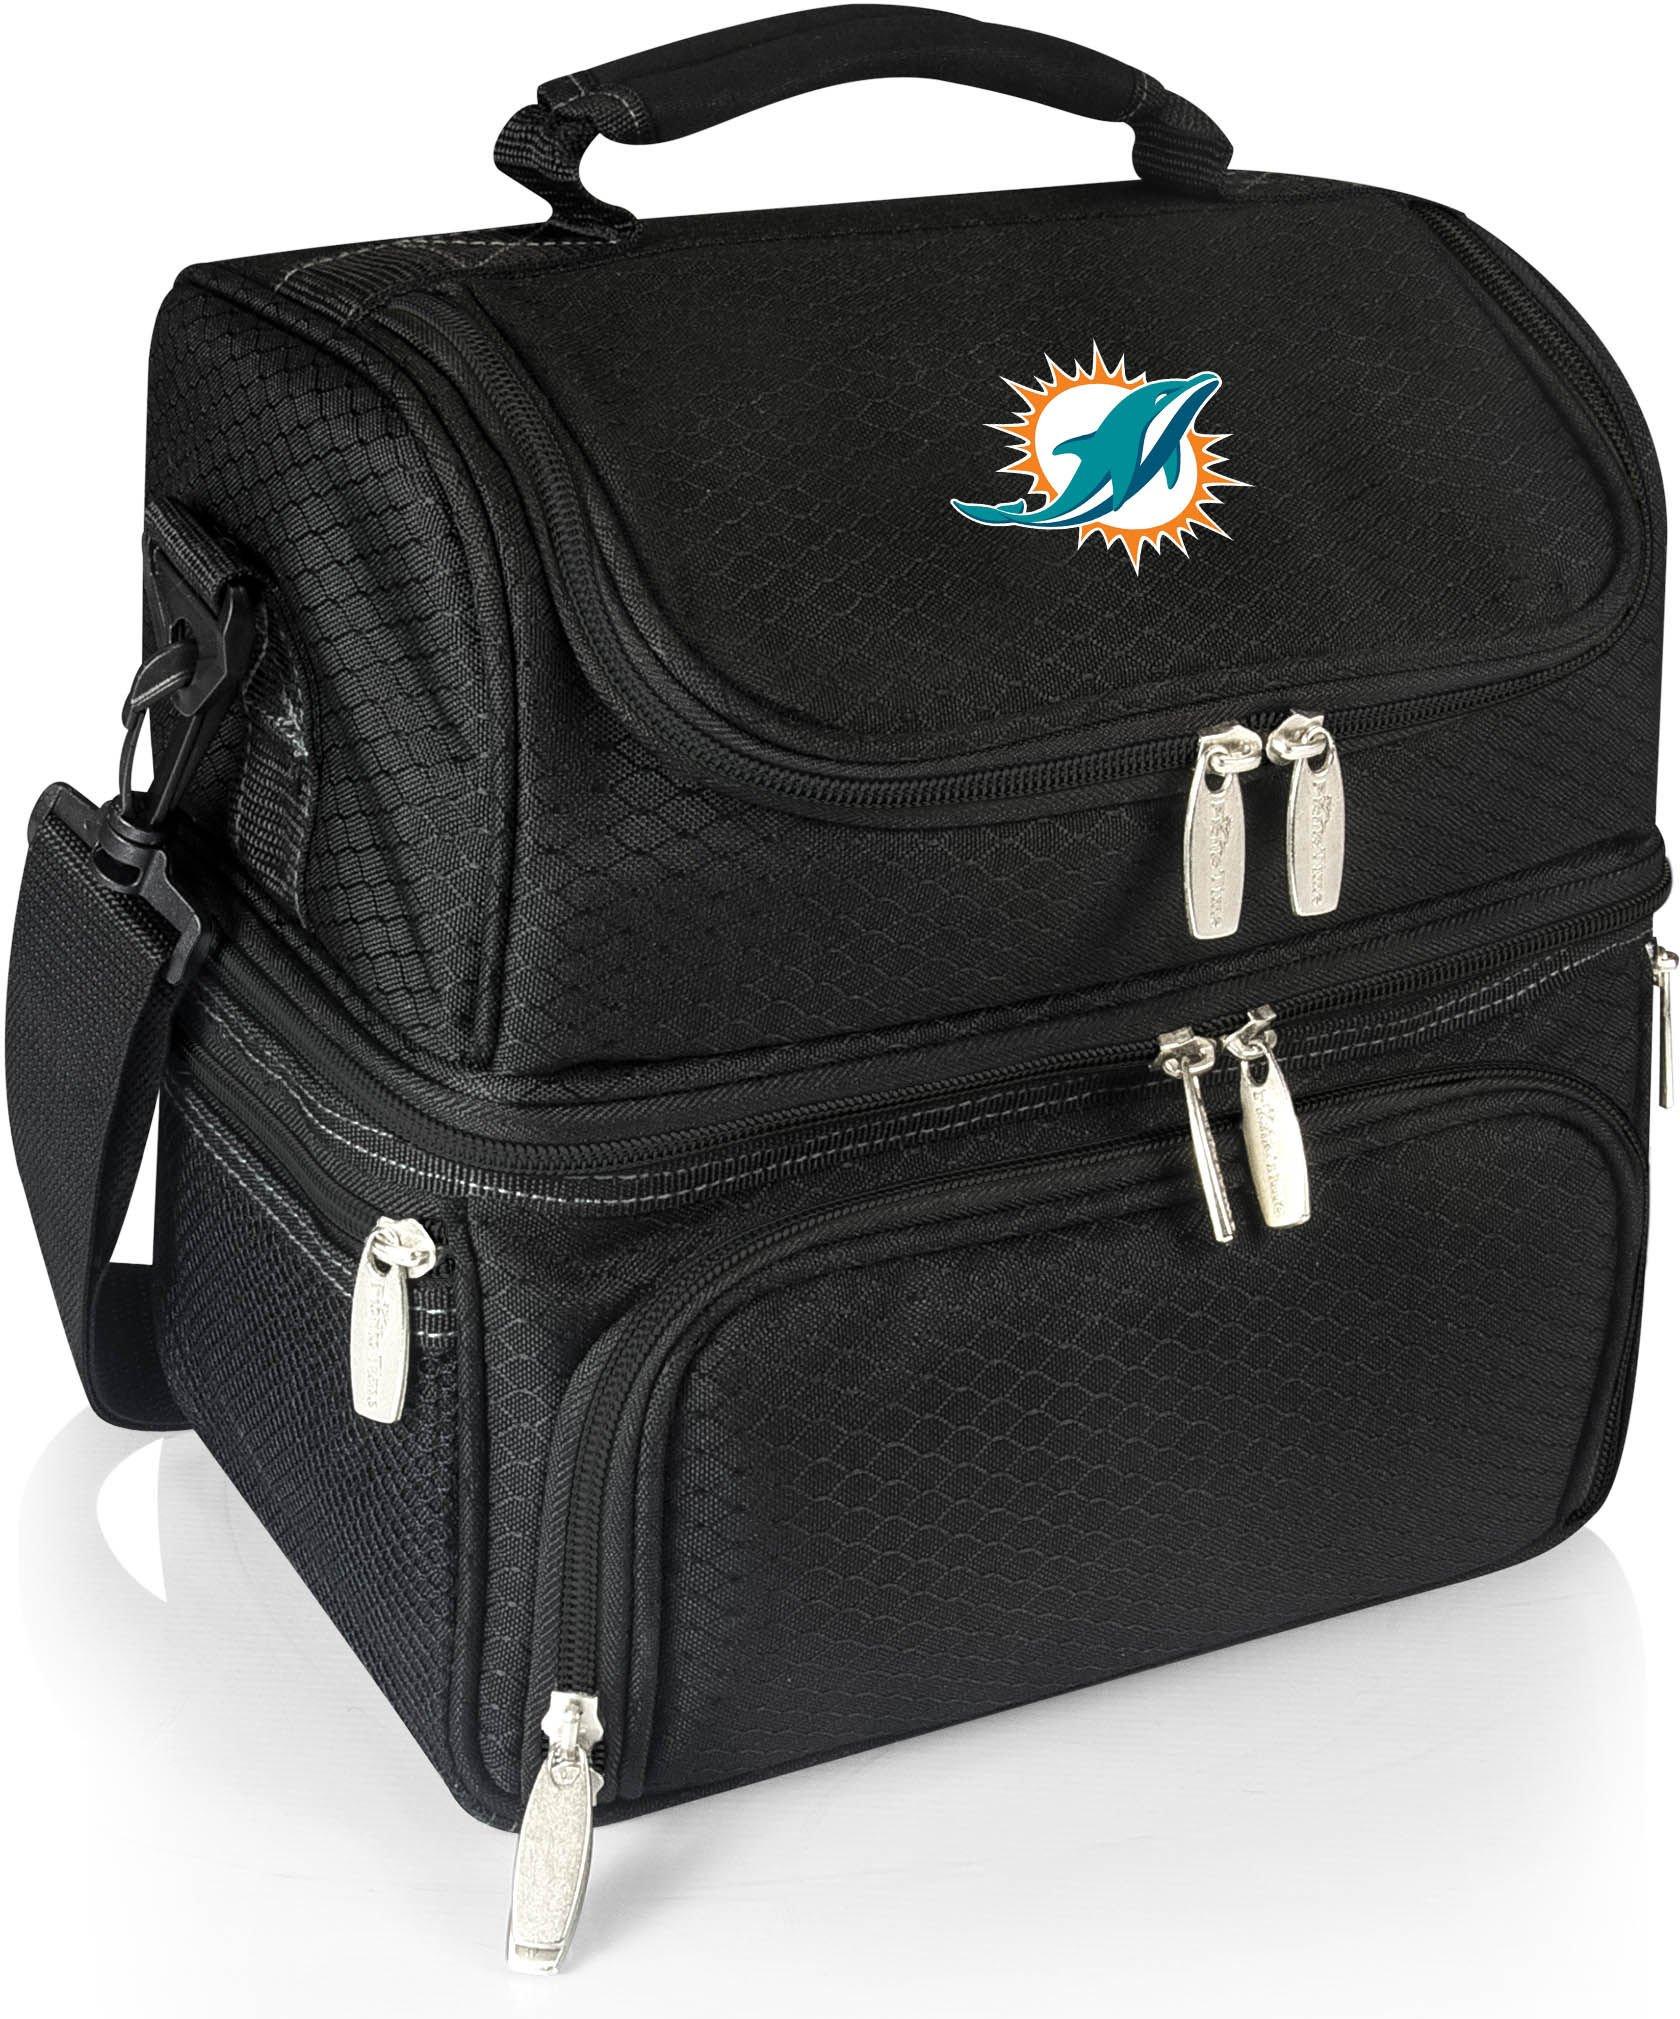 Miami Dolphins Pranzo Lunch Pack